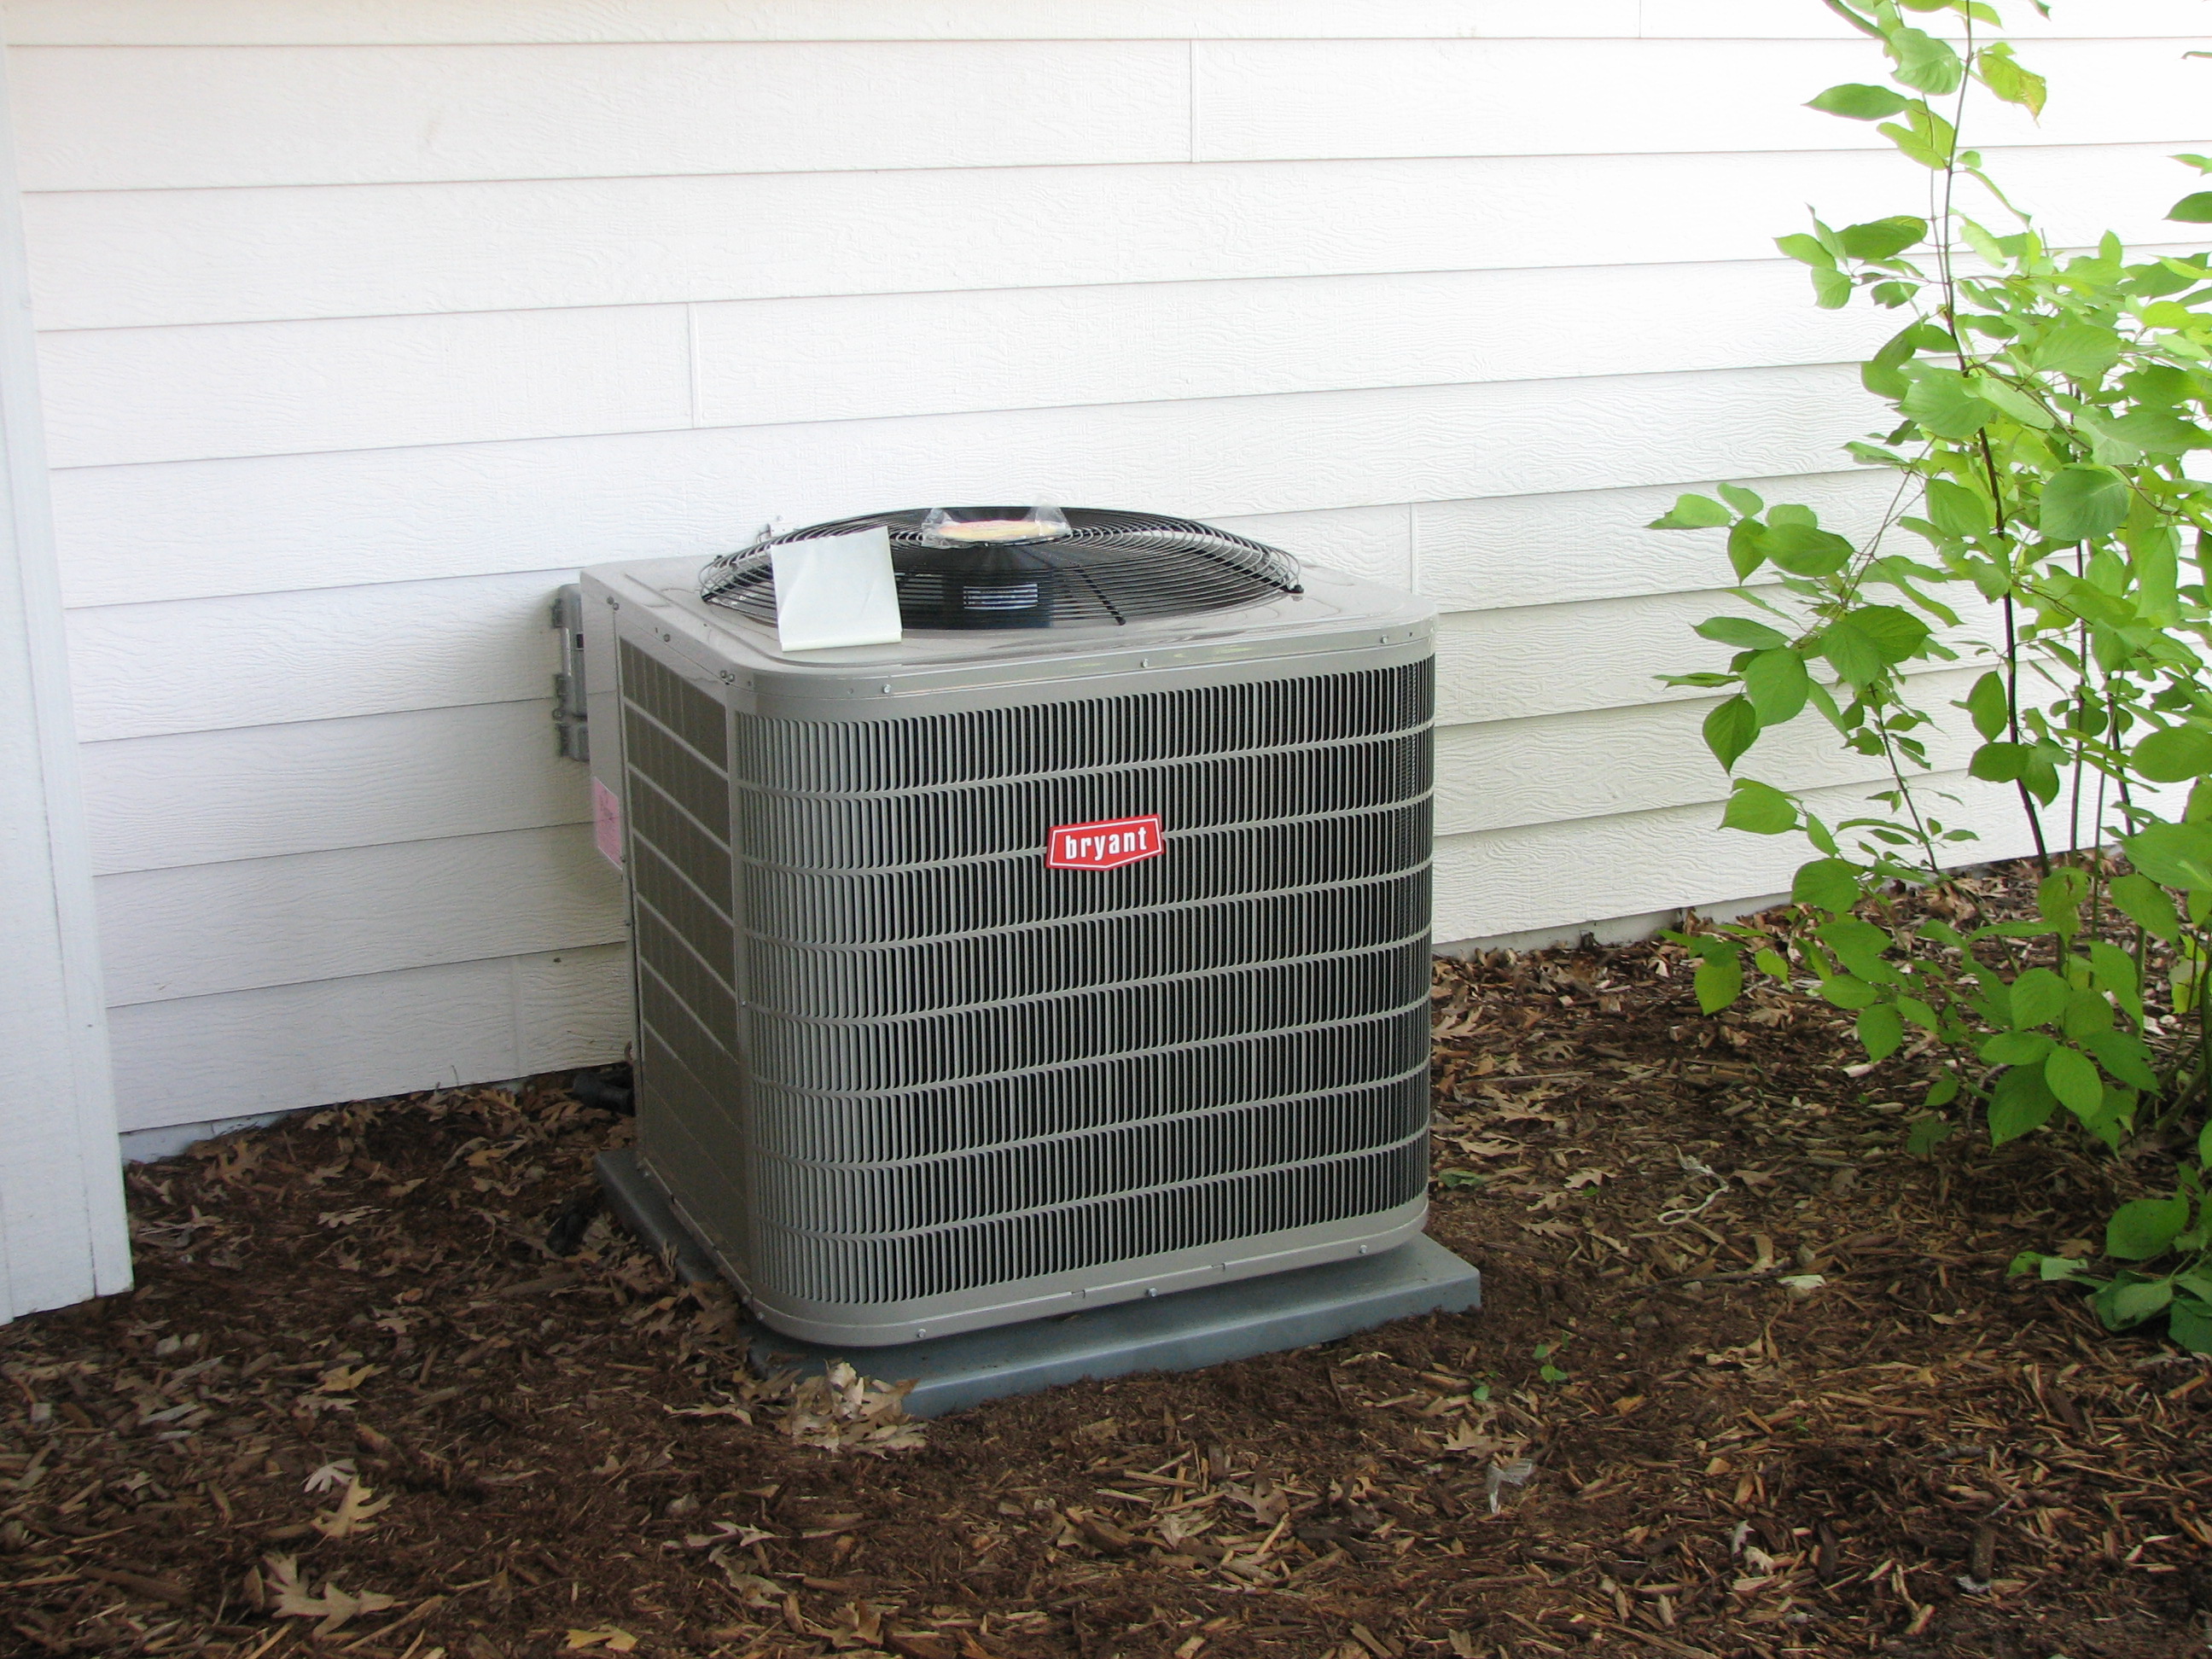 AIR CONDITIONING IN MIAMI, AC, AIR CONDITIONING SERVICES, HEATING